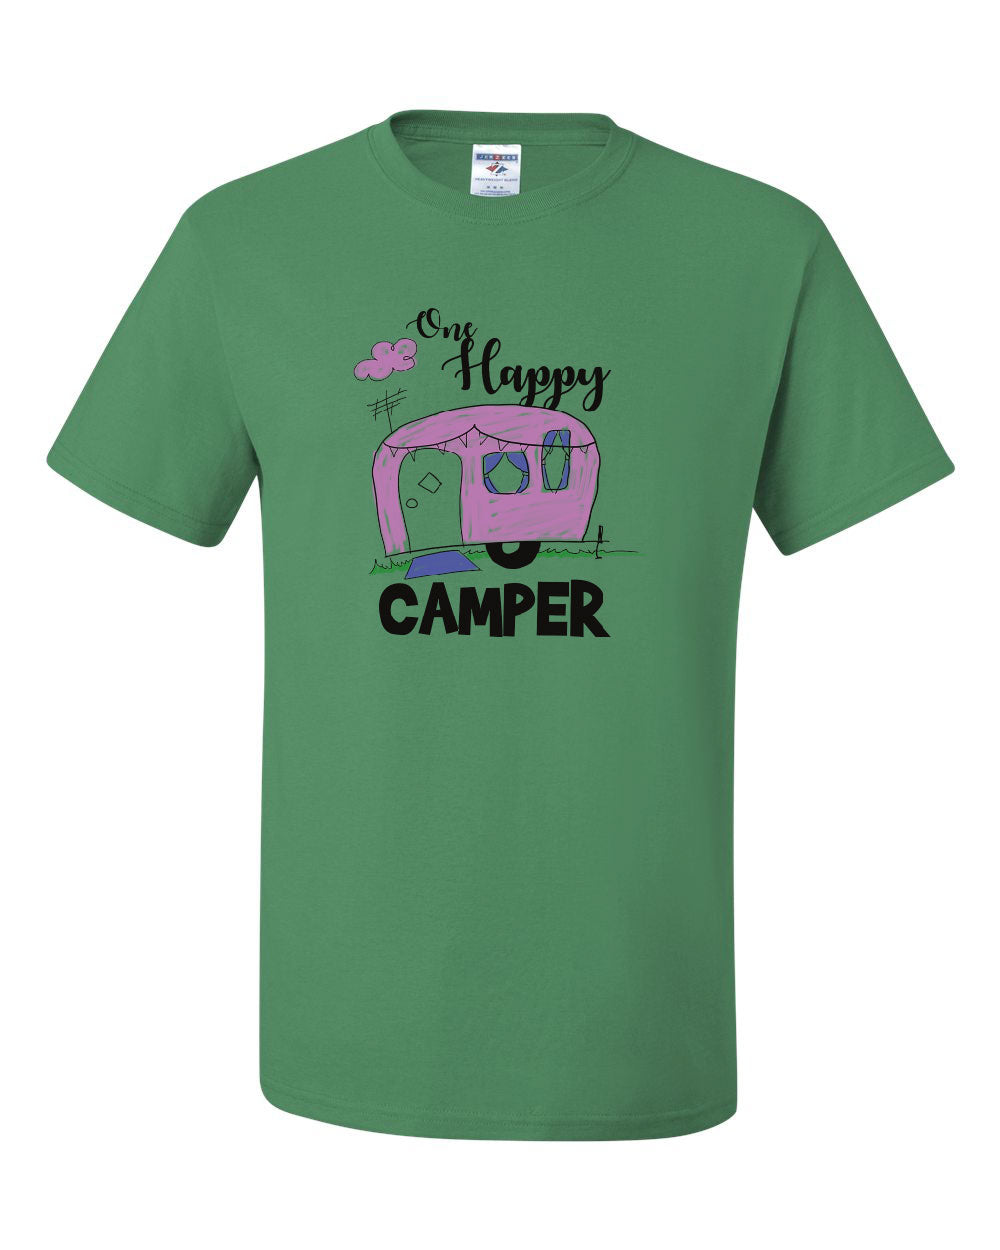 One Happy Camper T-Shirt RV Trailer Camping Nature Wilderness Tee Shirt ...